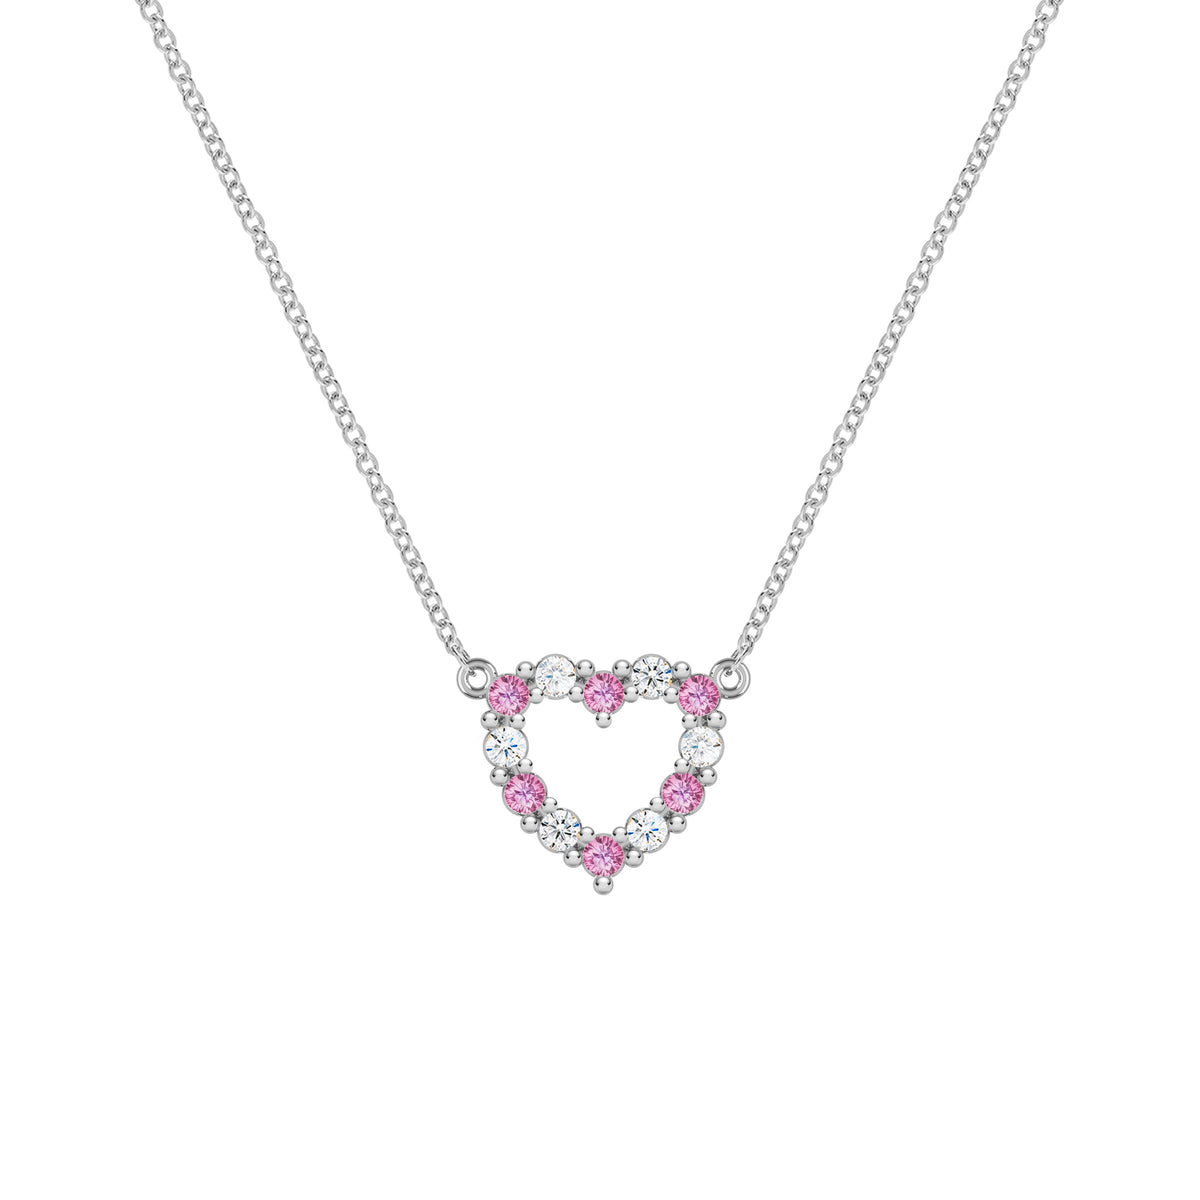 Rosecliff Small Heart Ruby Necklace in 14k Gold (July)